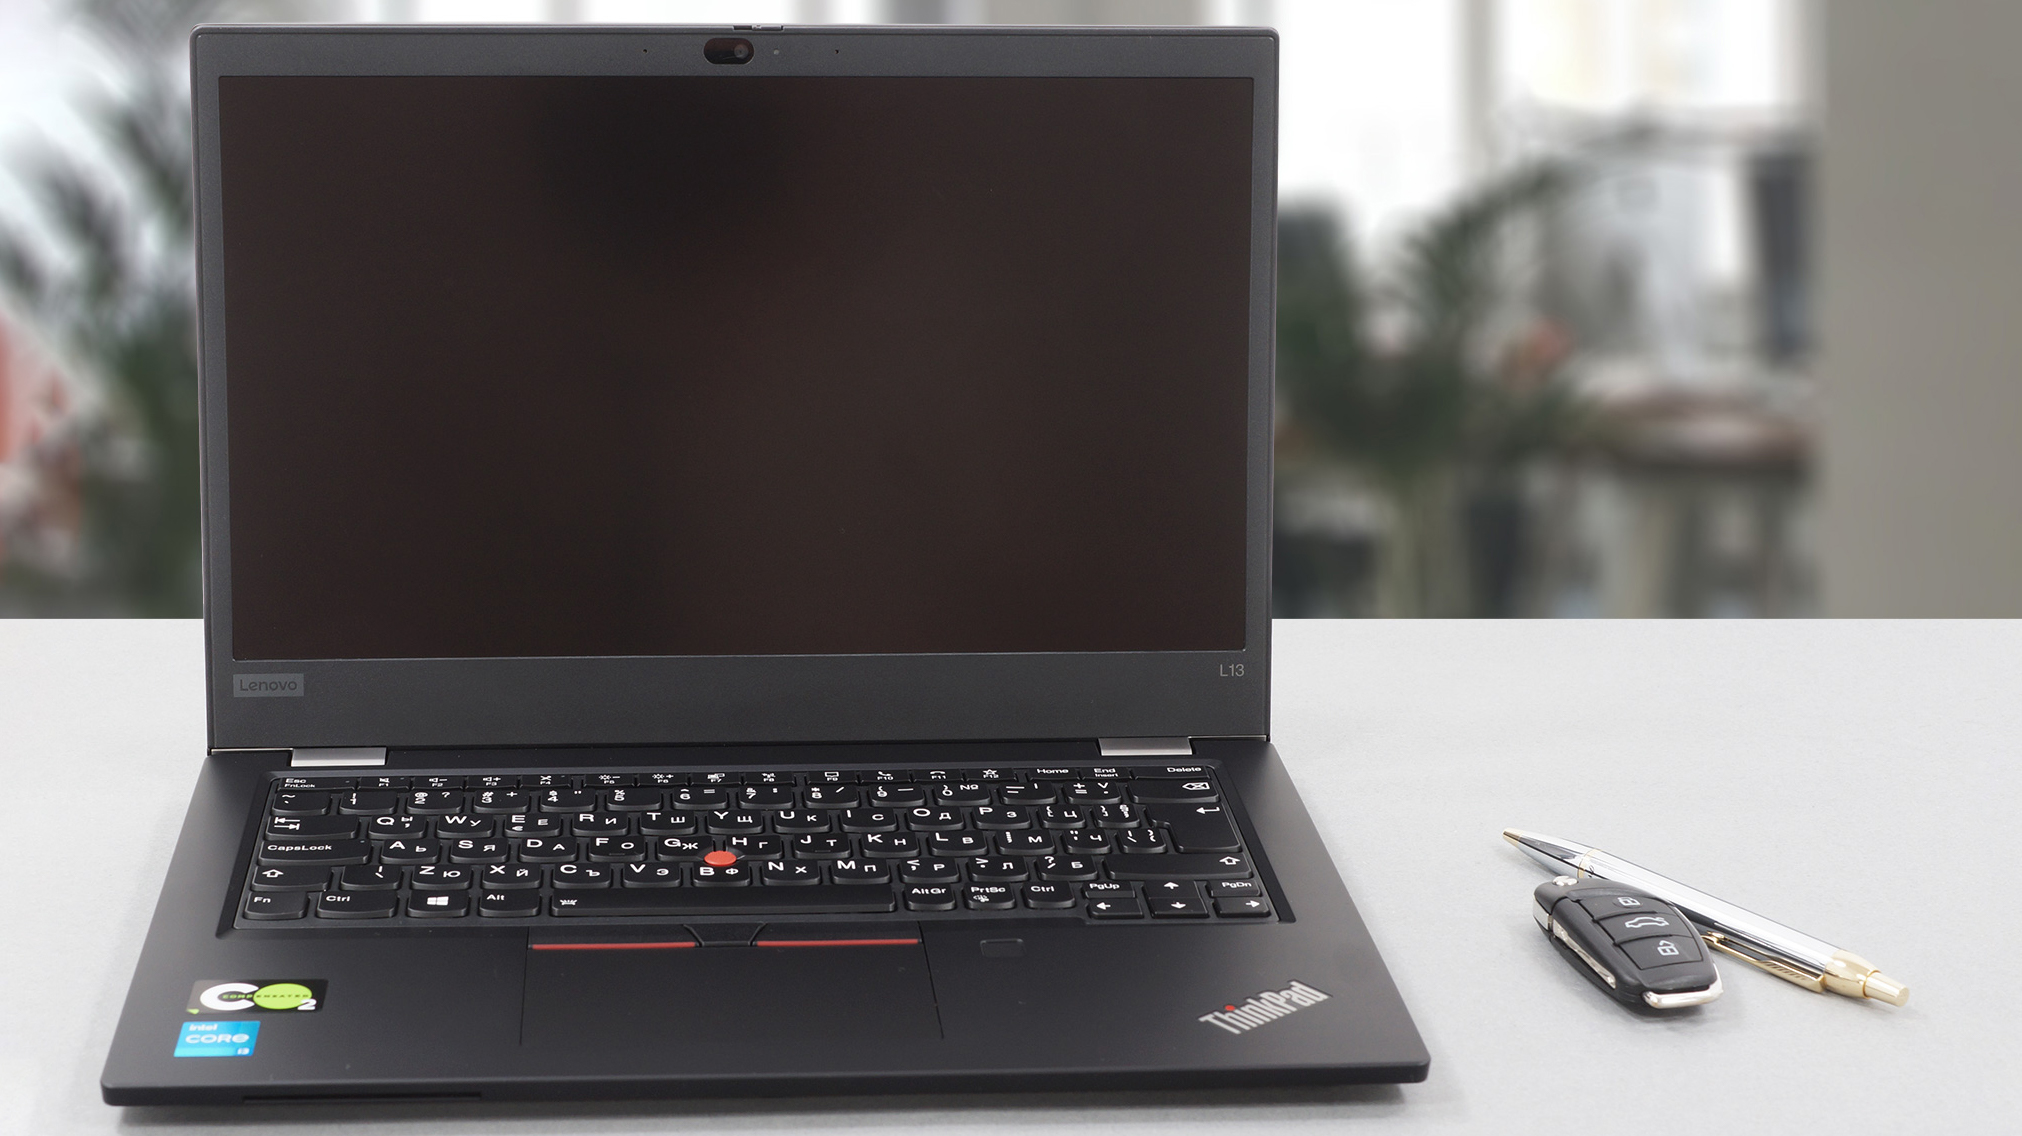 Lenovo ThinkPad L13 Gen 2 review - aimed at students and professionals |  LaptopMedia.com